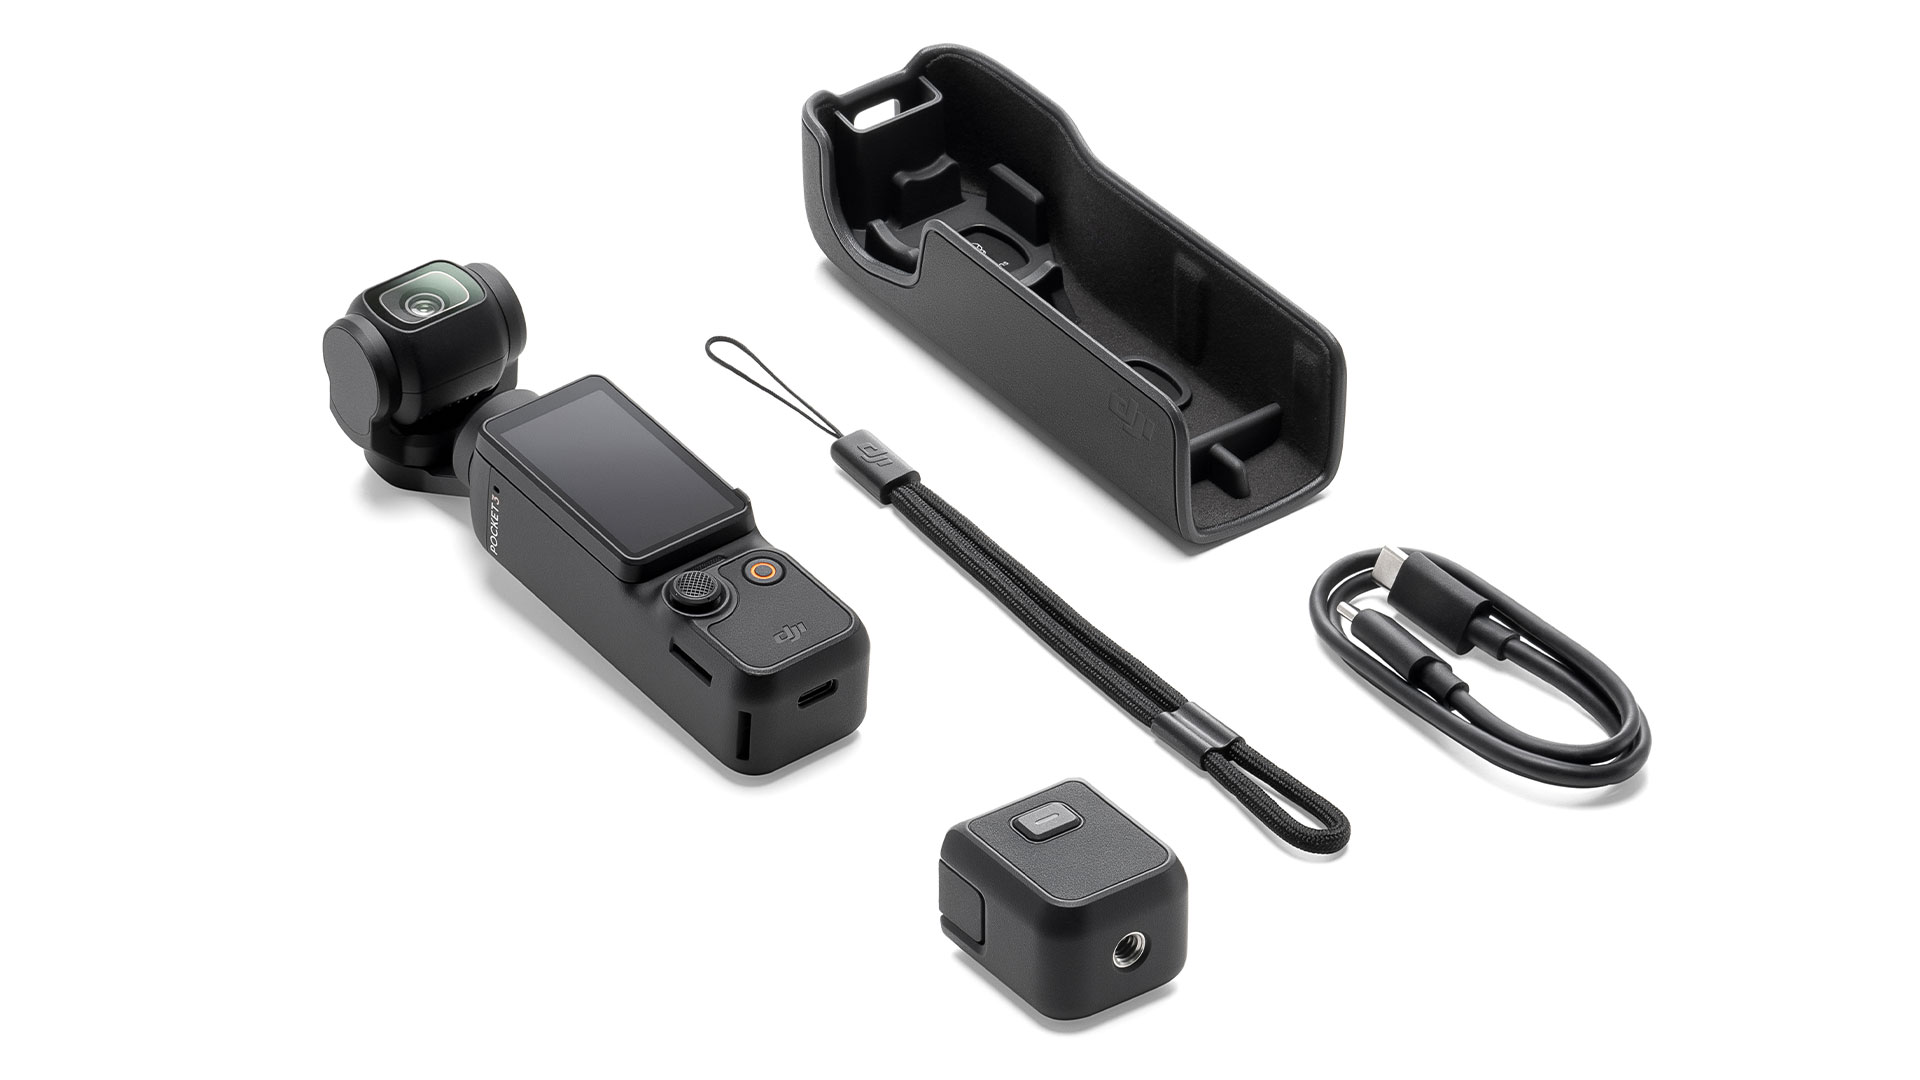 DJI OSMO Action 4 specs leak ahead of July 25 release, indicating